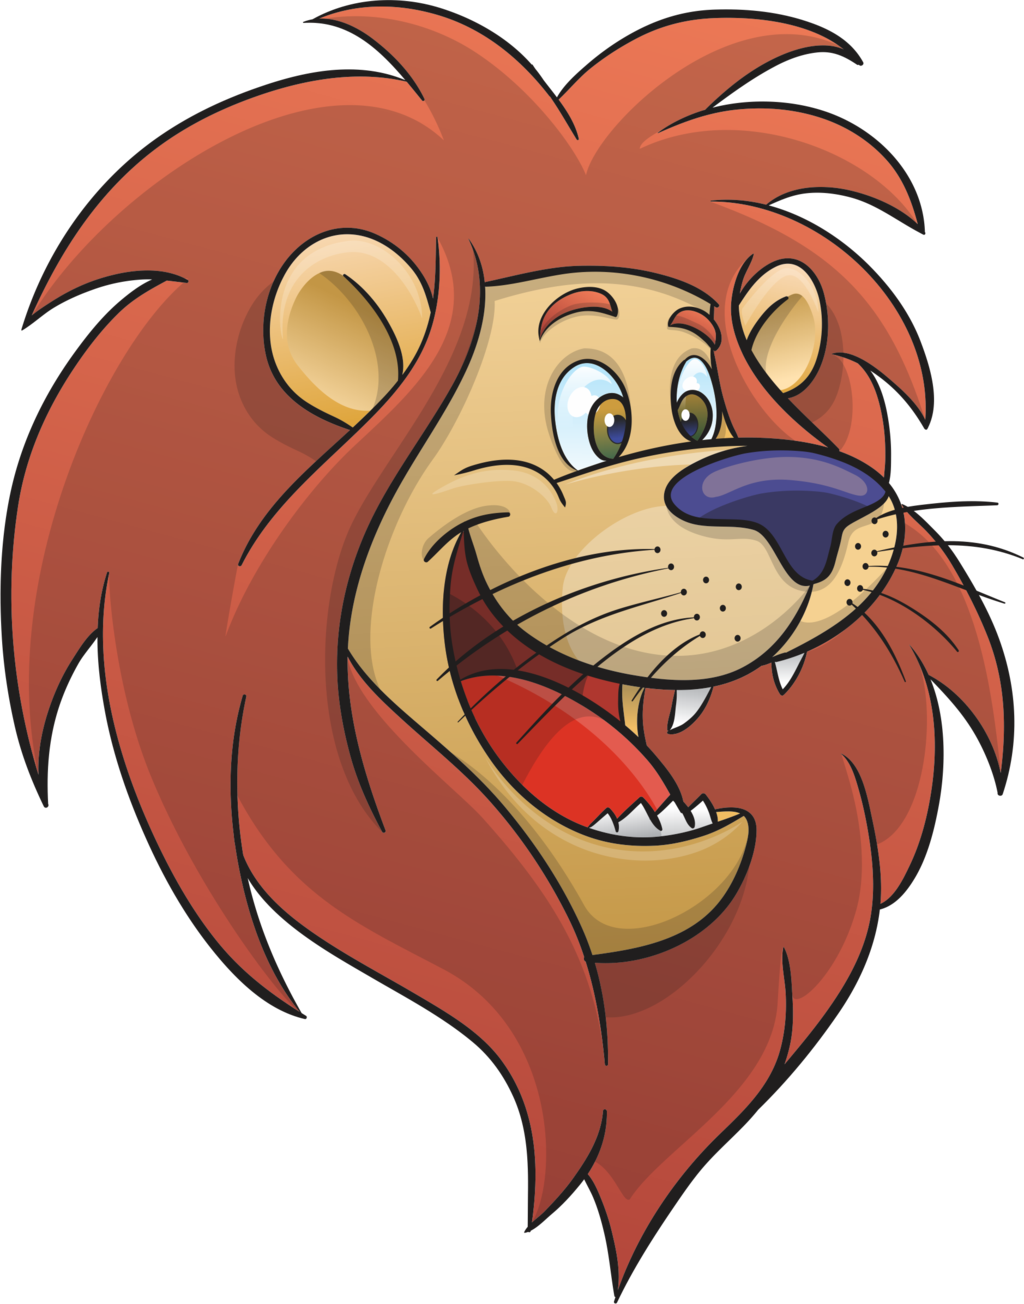 10 Lion Cartoon Face   Free Cliparts That You Can Download To You    